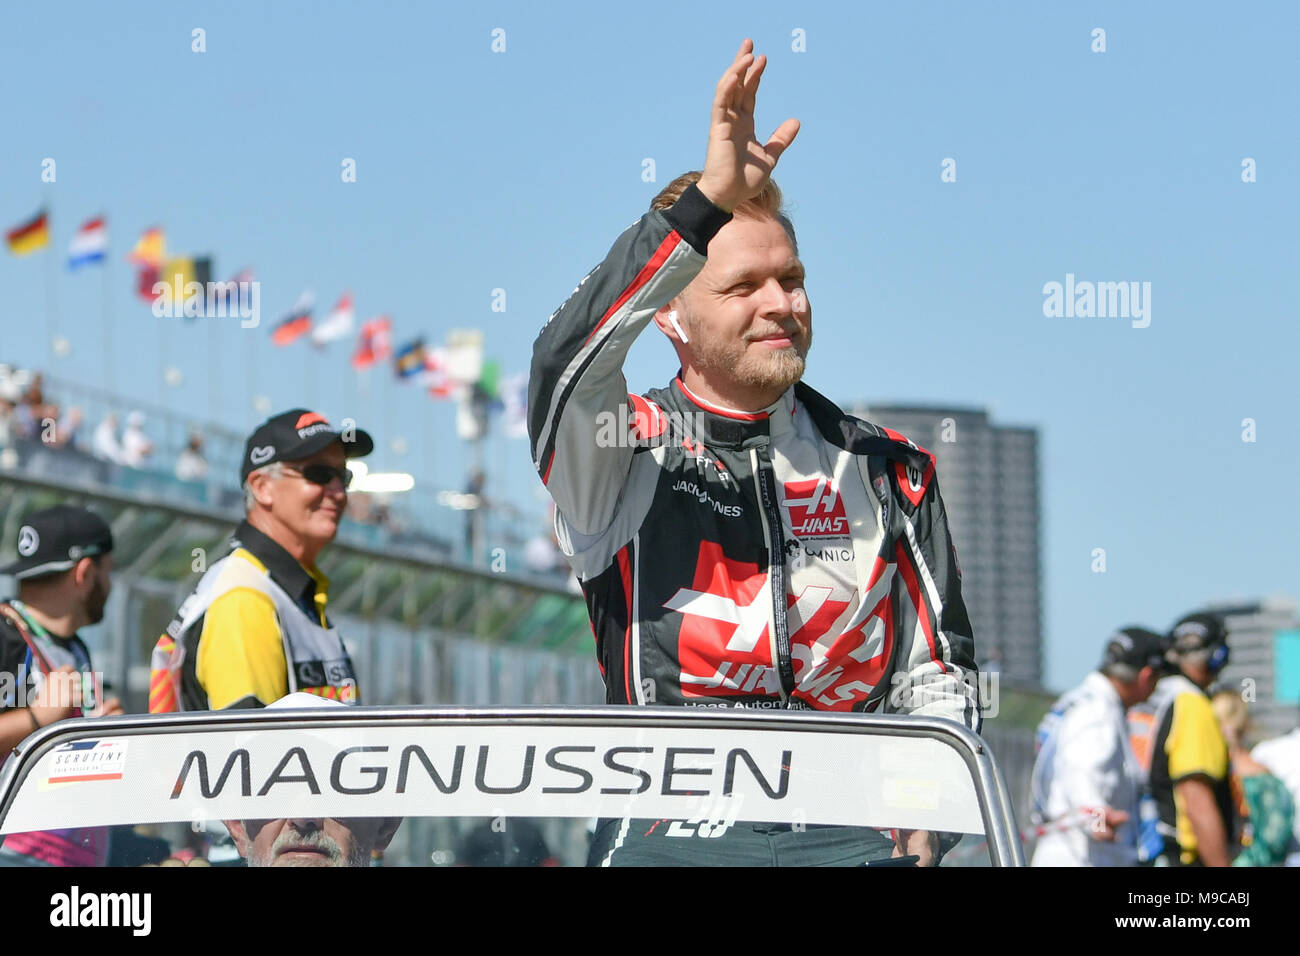 Albert Park, Melbourne, Australia. 25th Mar, 2018. Kevin Magnussen (DEN) #20 from the Haas F1 Team waves to the crowd during the drivers' parade at the 2018 Australian Formula One Grand Prix at Albert Park, Melbourne, Australia. Sydney Low/Cal Sport Media/Alamy Live News Stock Photo